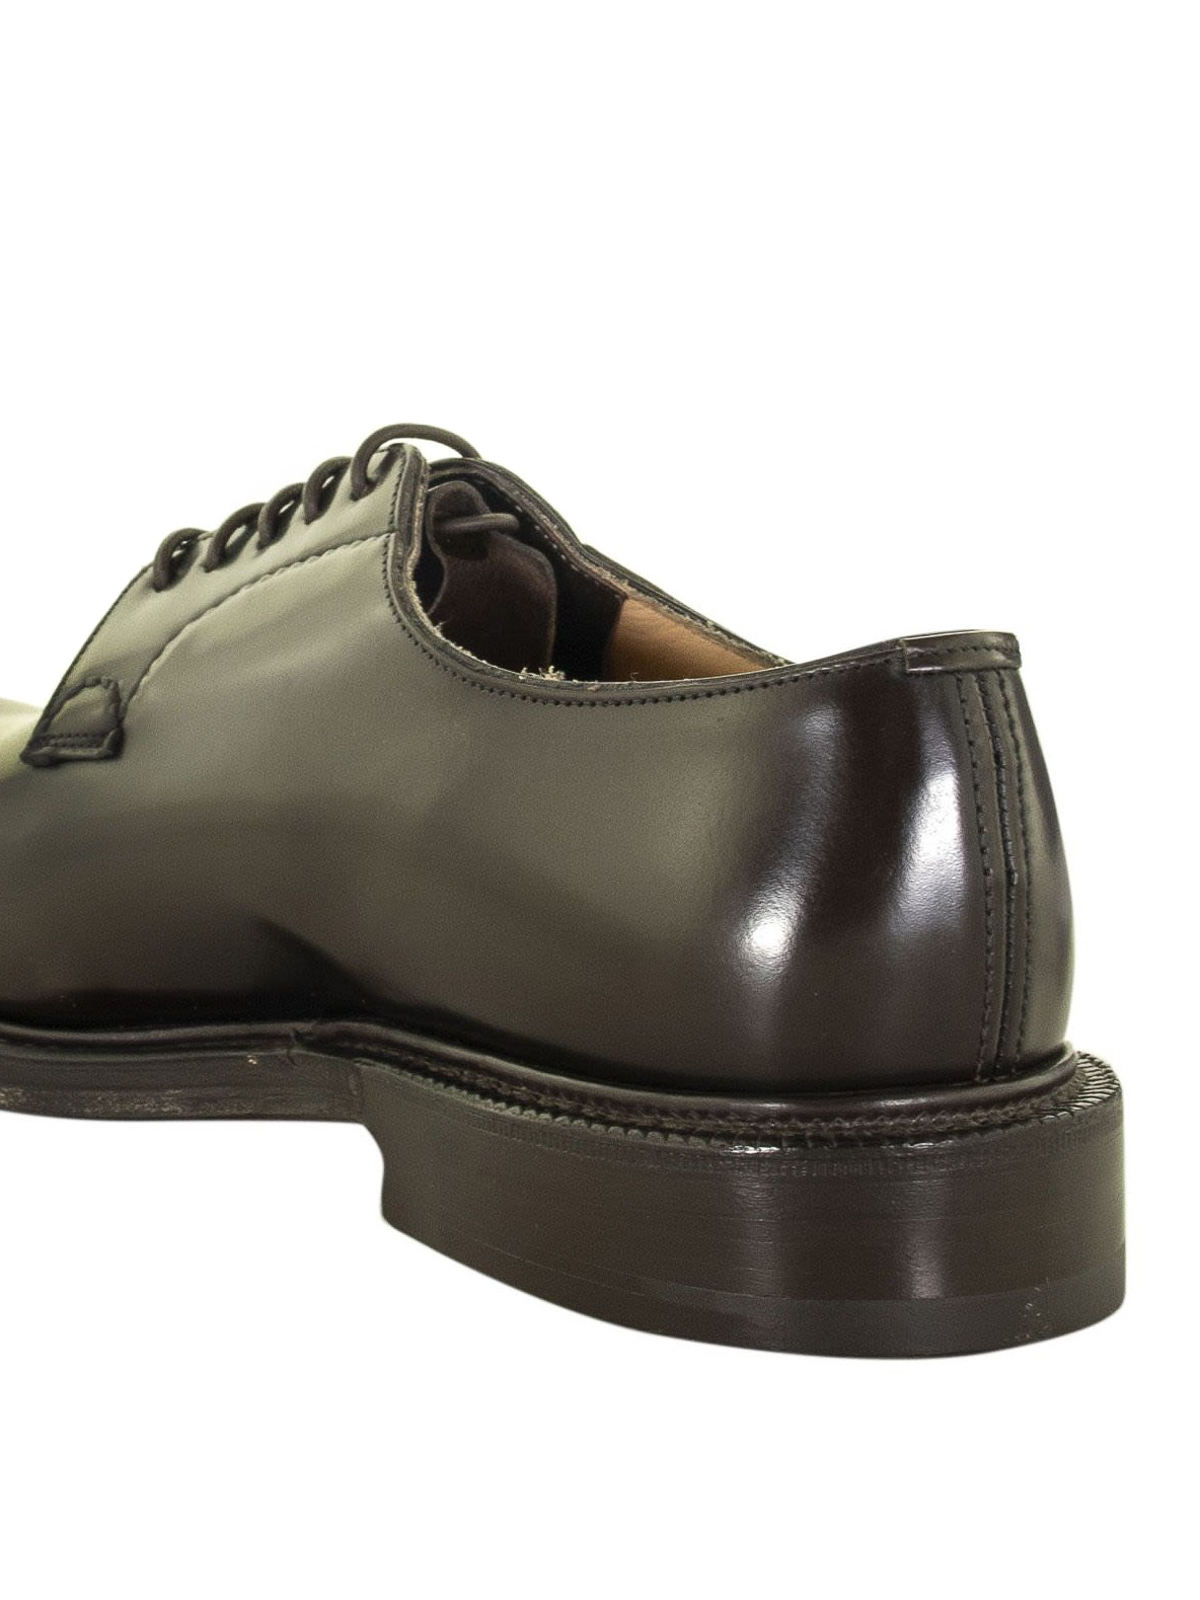 Shop Church's Shannon Brown Polished Leather Derby Shoes